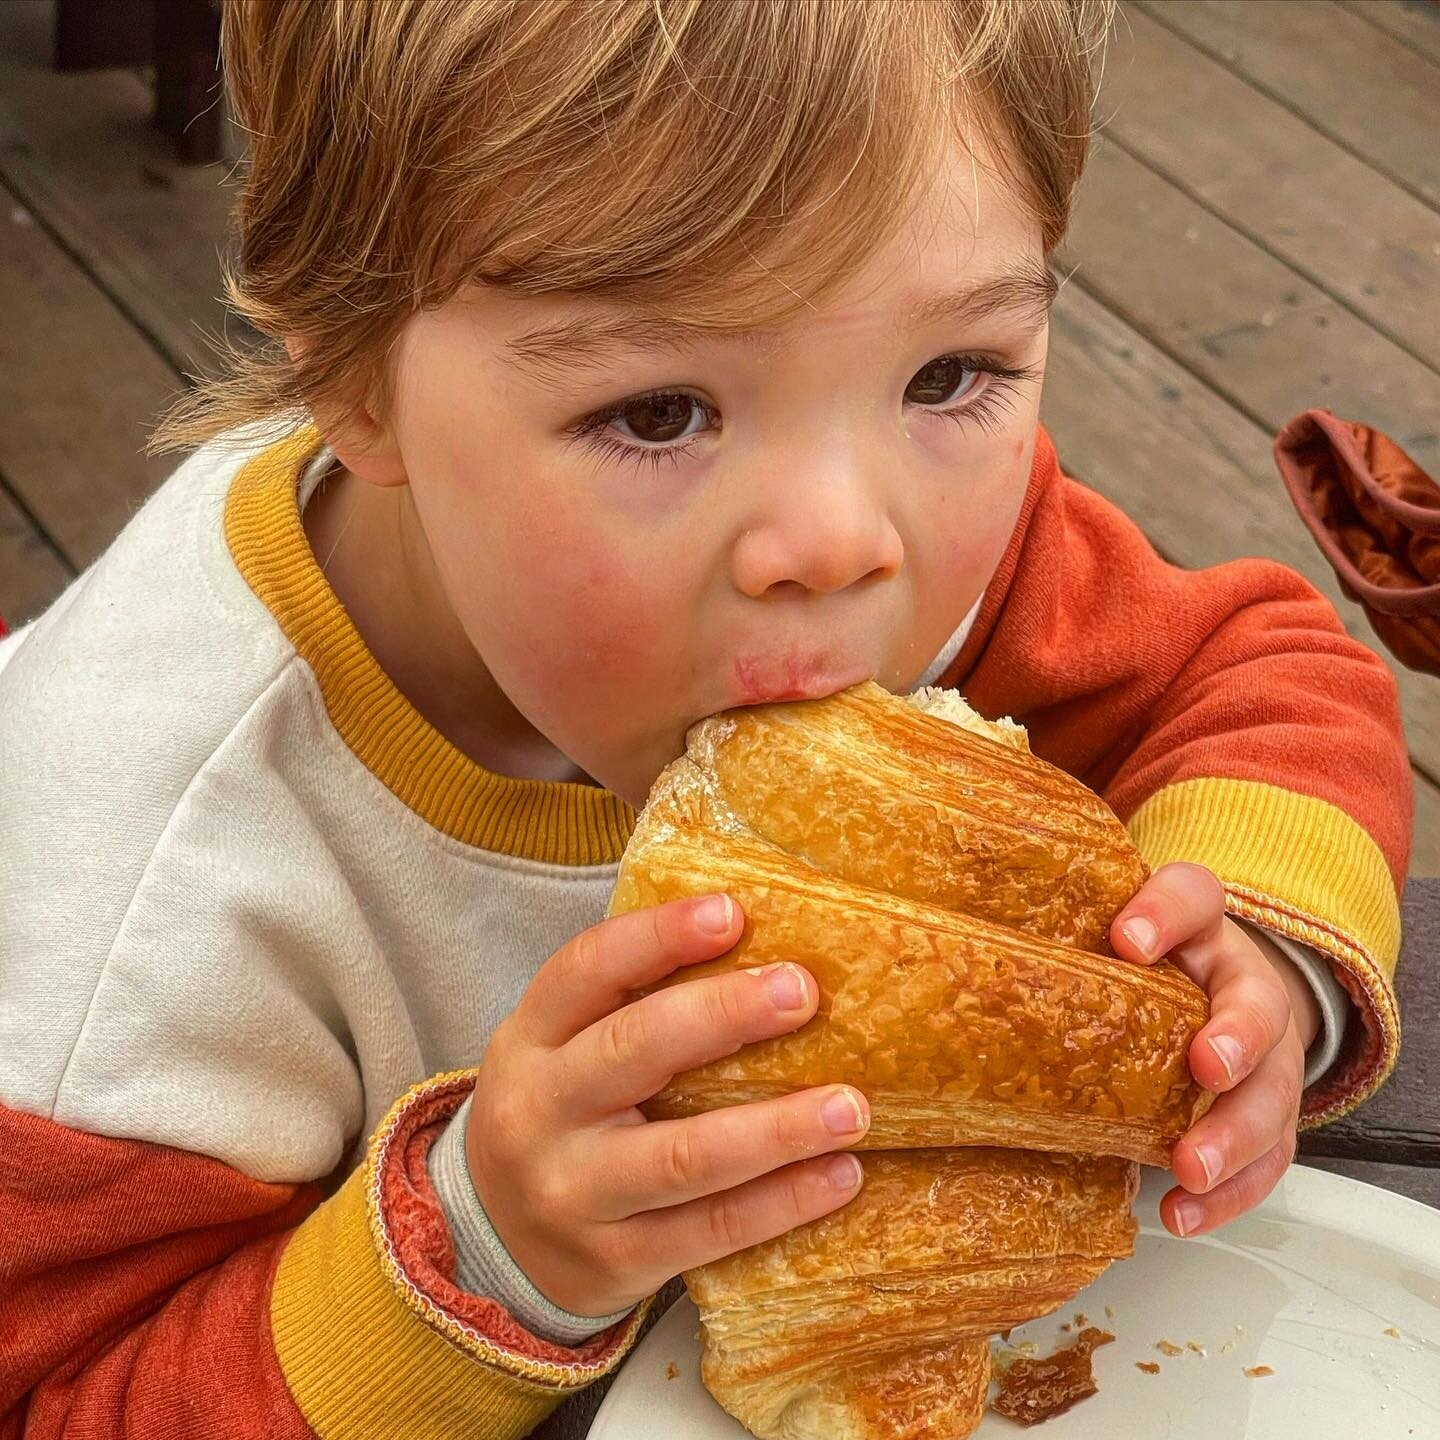 Cute customer of the day plus a croissant the size of his head&hellip; 🥐 #croissant #cutecustomer #pastrylove #bakerylife